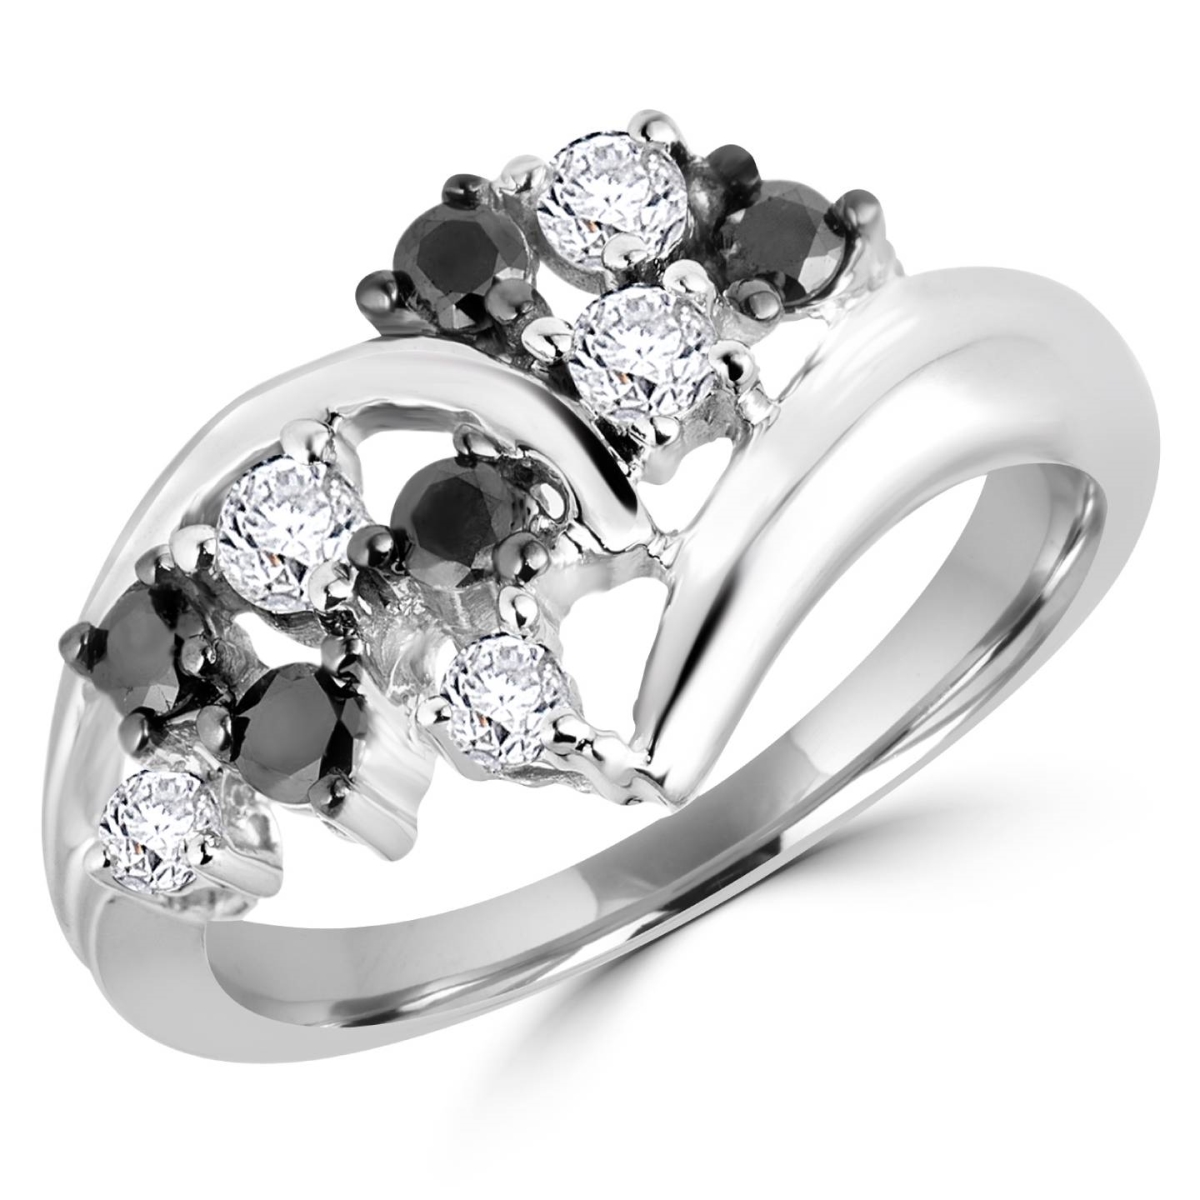 Picture of Majesty Diamonds MDR140090-P 0.5 CTW Black & White Diamond Fashion Cocktail Ring in 14K White Gold